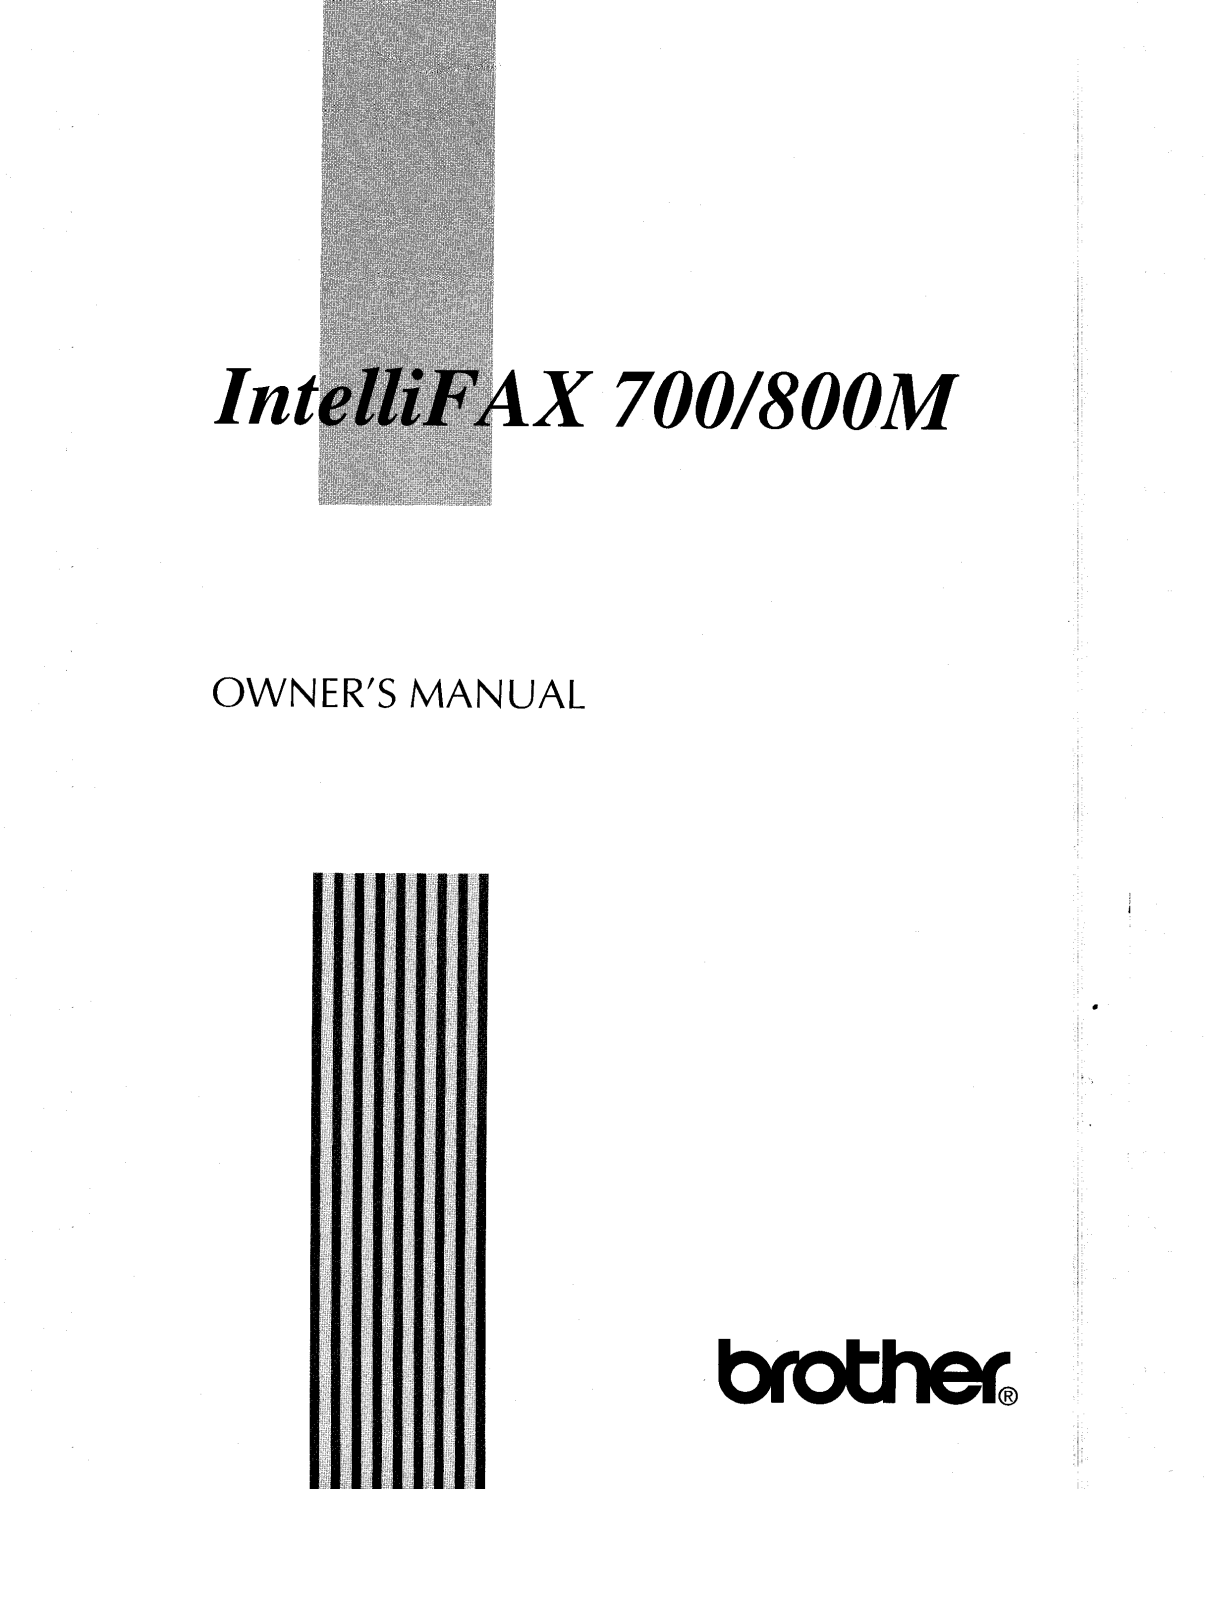 Brother IntelliFAX-700M, IntelliFAX-800M Owner Manual